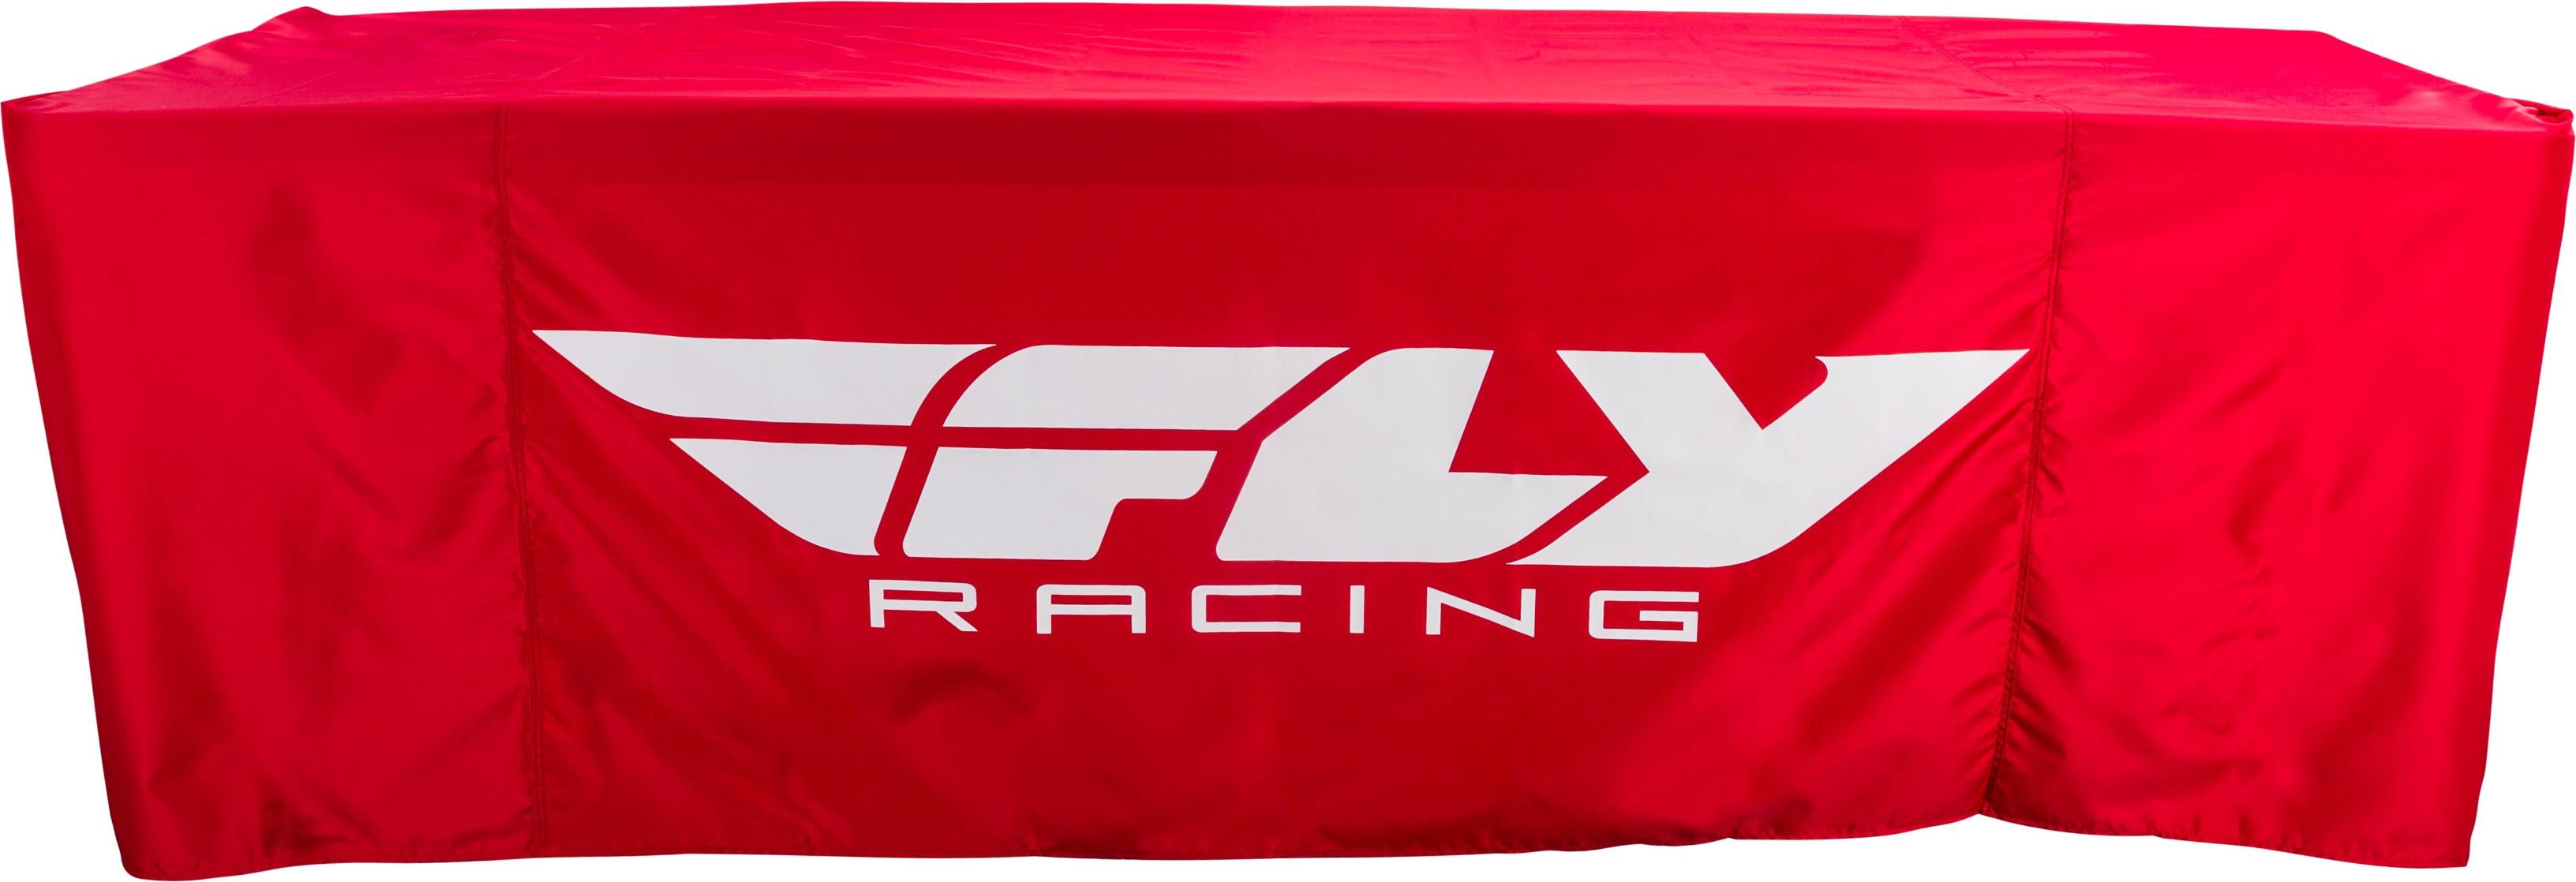 Fly Racing - Convertible Table - 360-9887